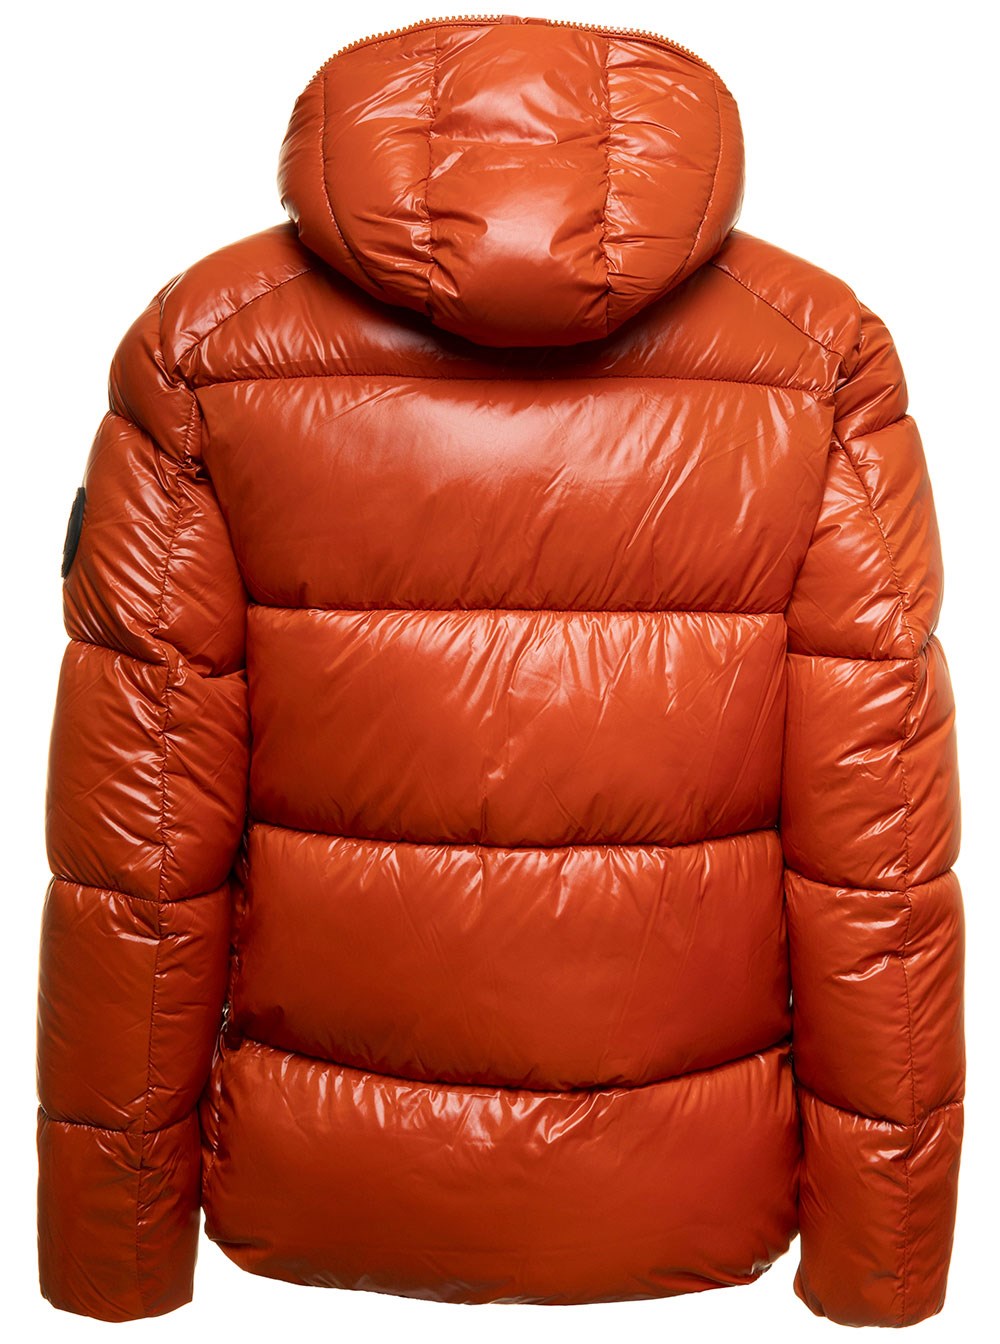 Edgard Orange Down Jacket in Padded and Quilted Tech Fabric Save the ...